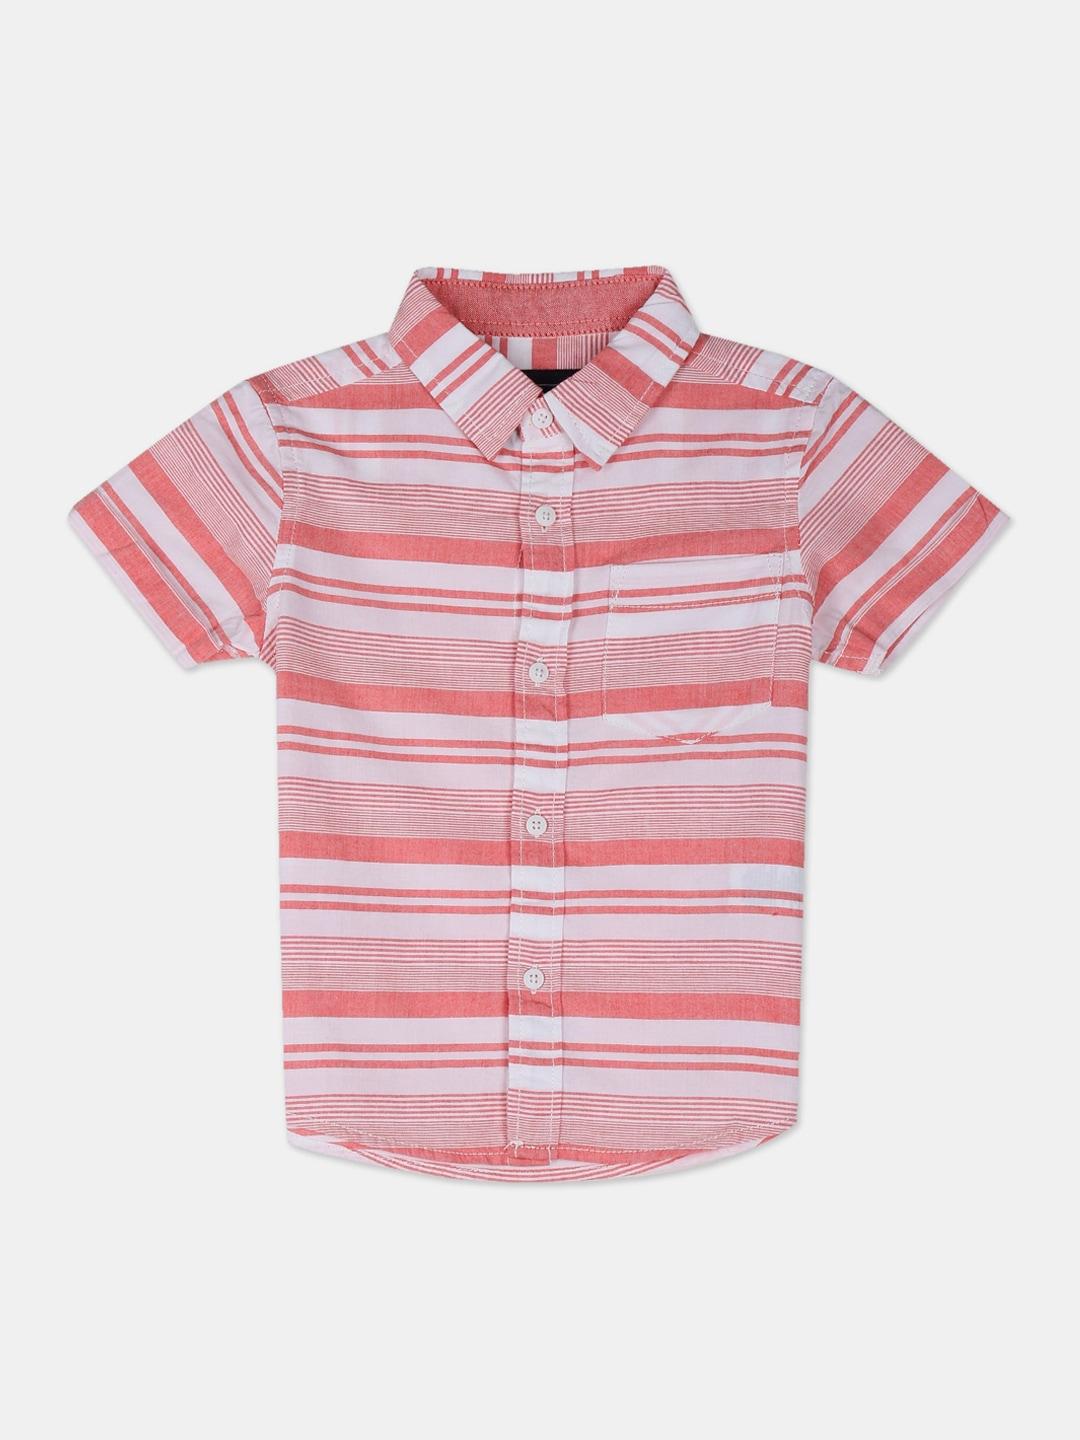 cherokee-boys-red-&-off-white-regular-fit-striped-casual-shirt